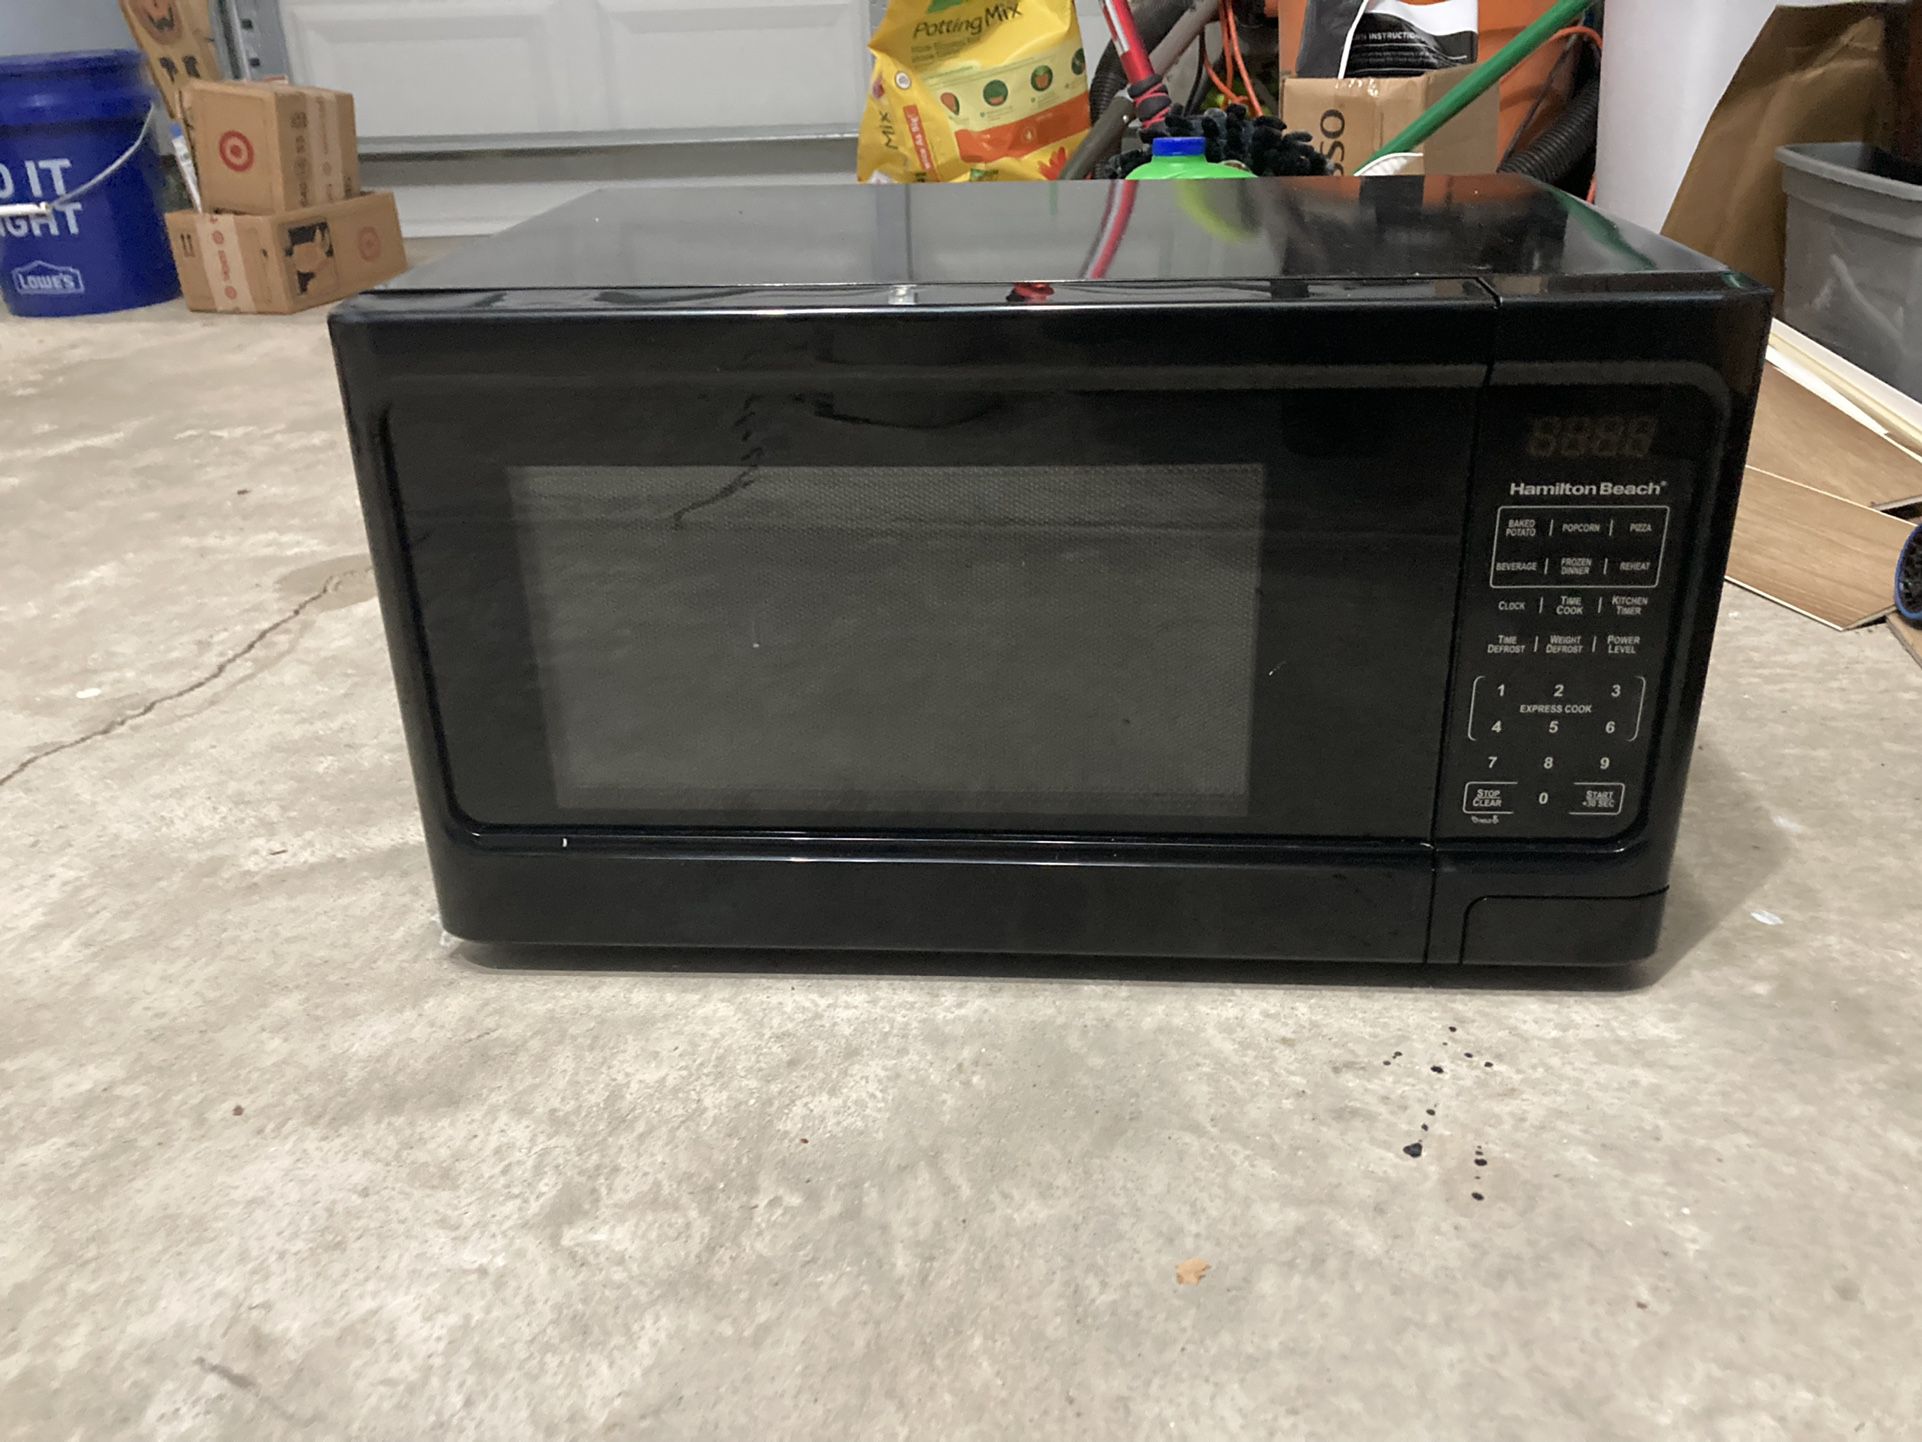 SOLD ‼️Discount Sale‼️ Clearance‼️Lunik Microwave with Defrost